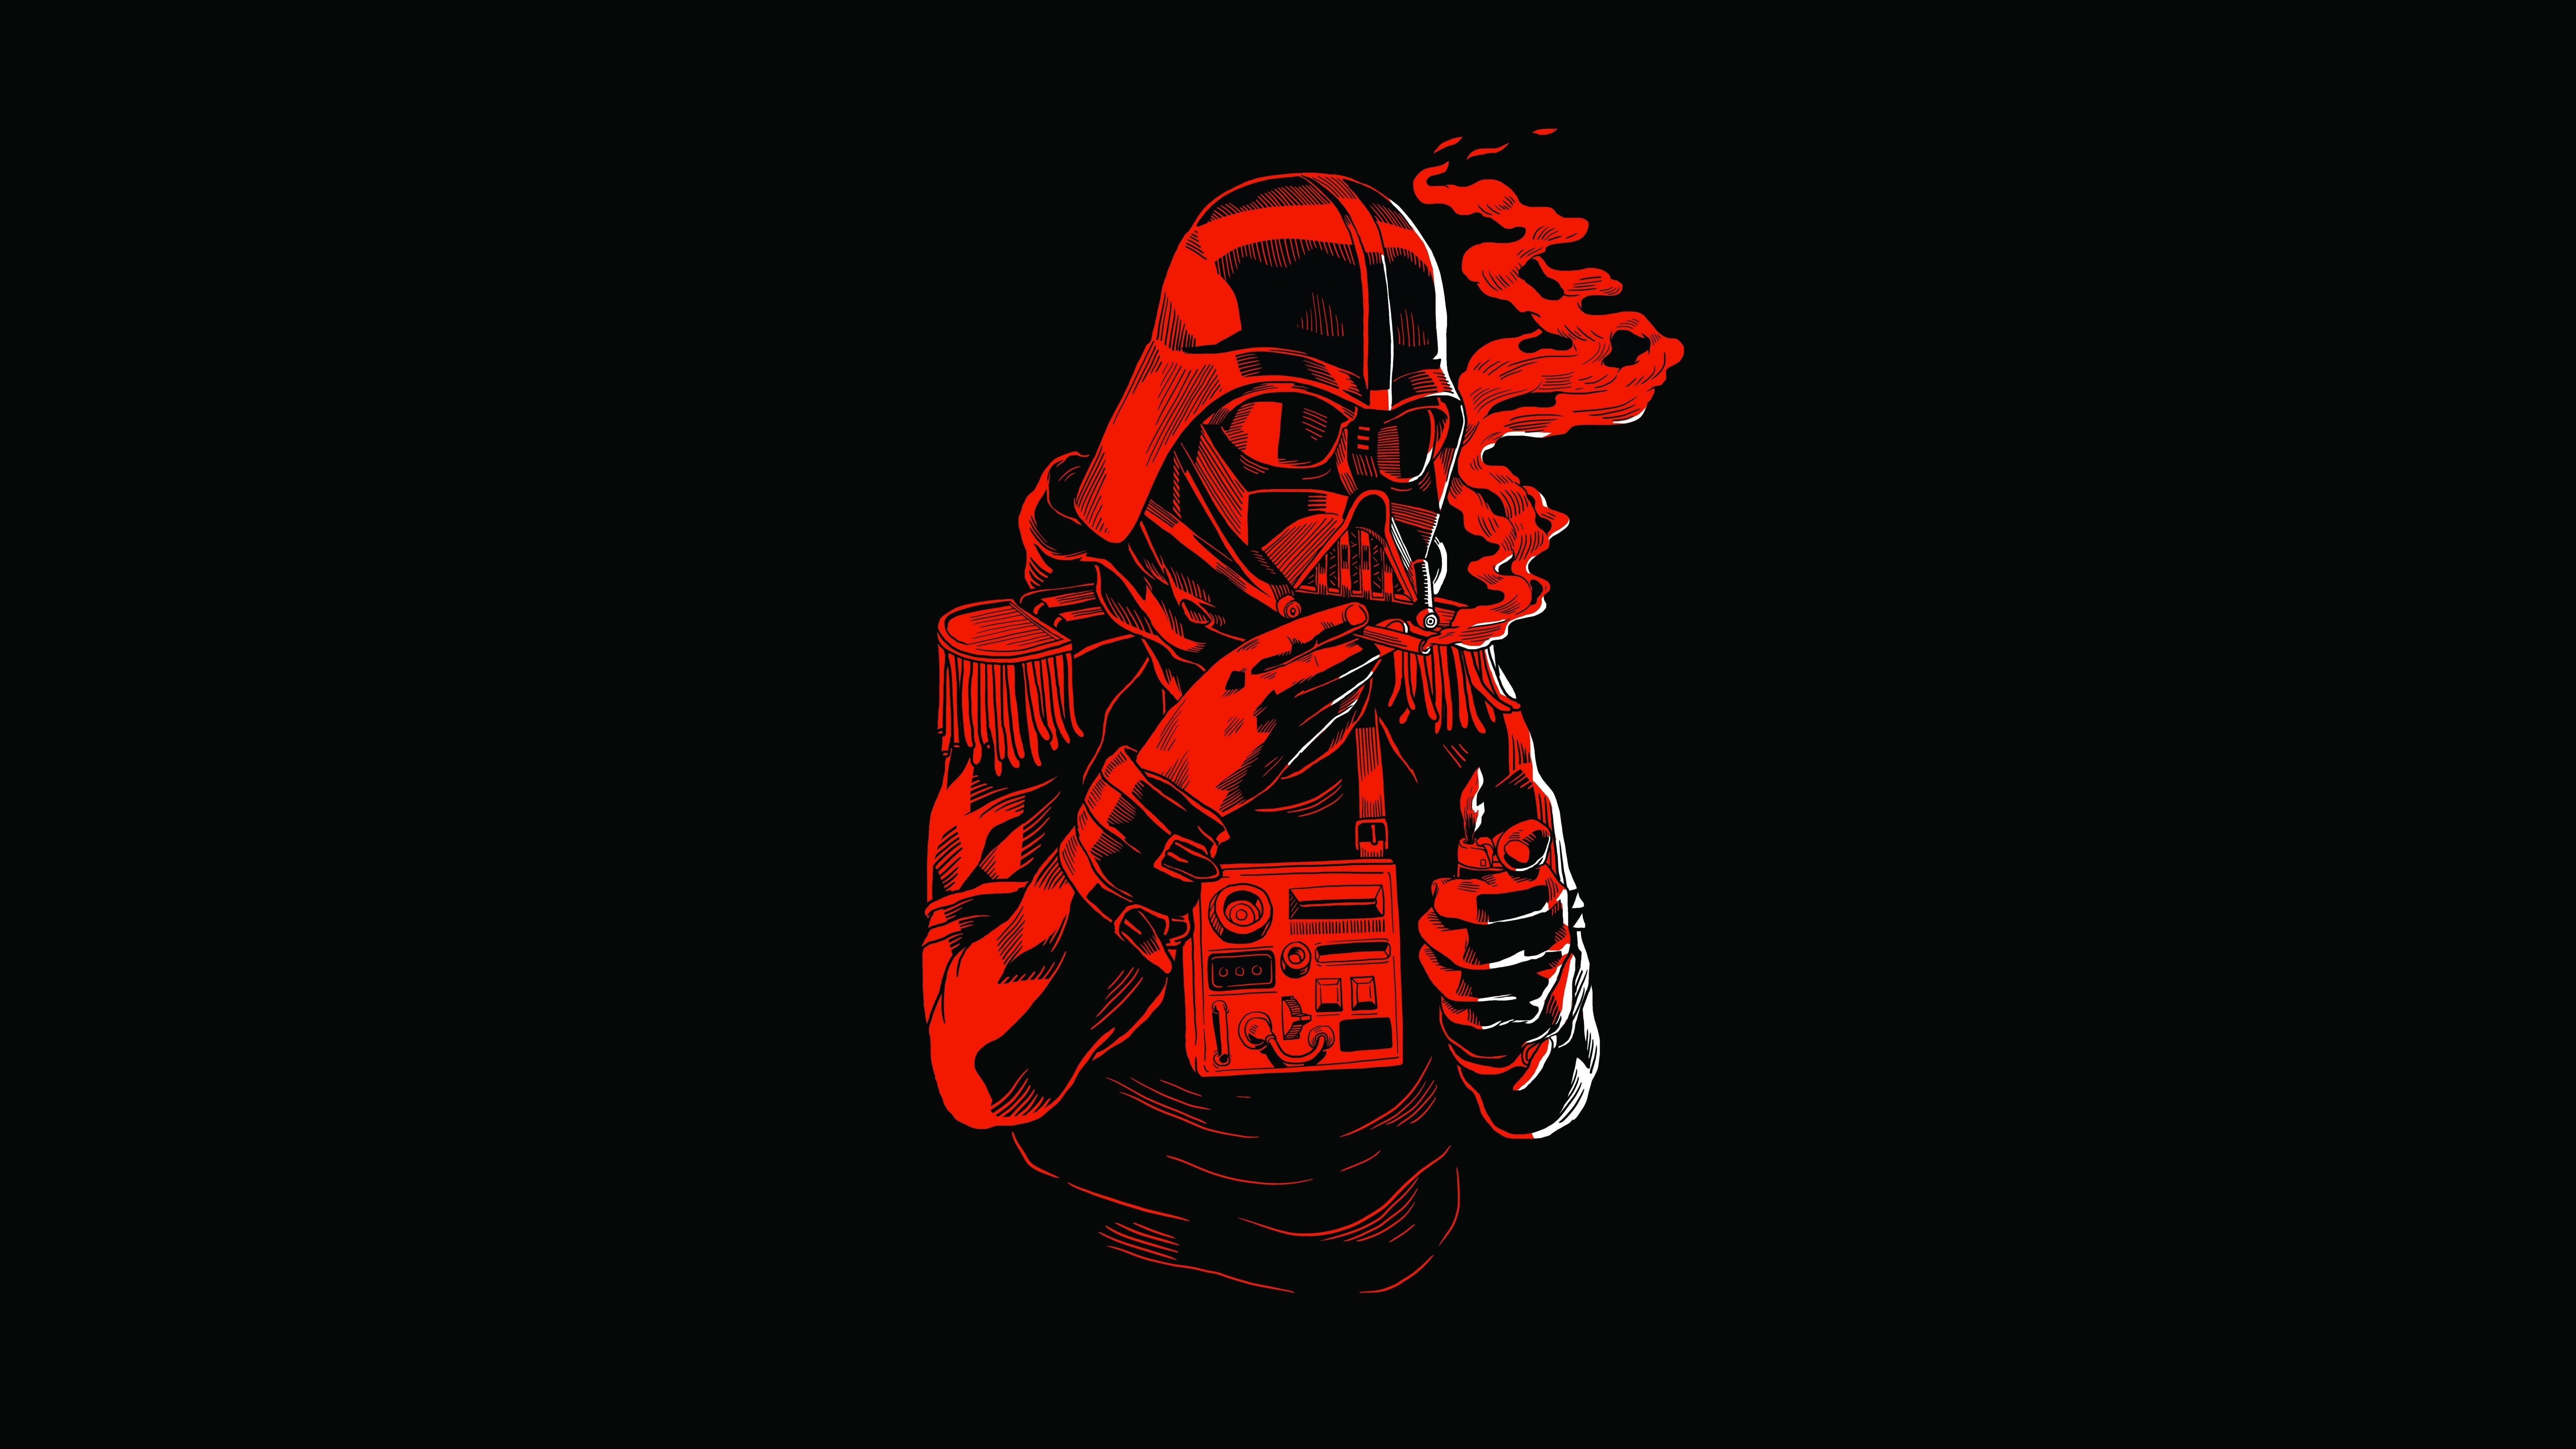 Red and Black Star Wars Wallpaper Free Red and Black Star Wars Background